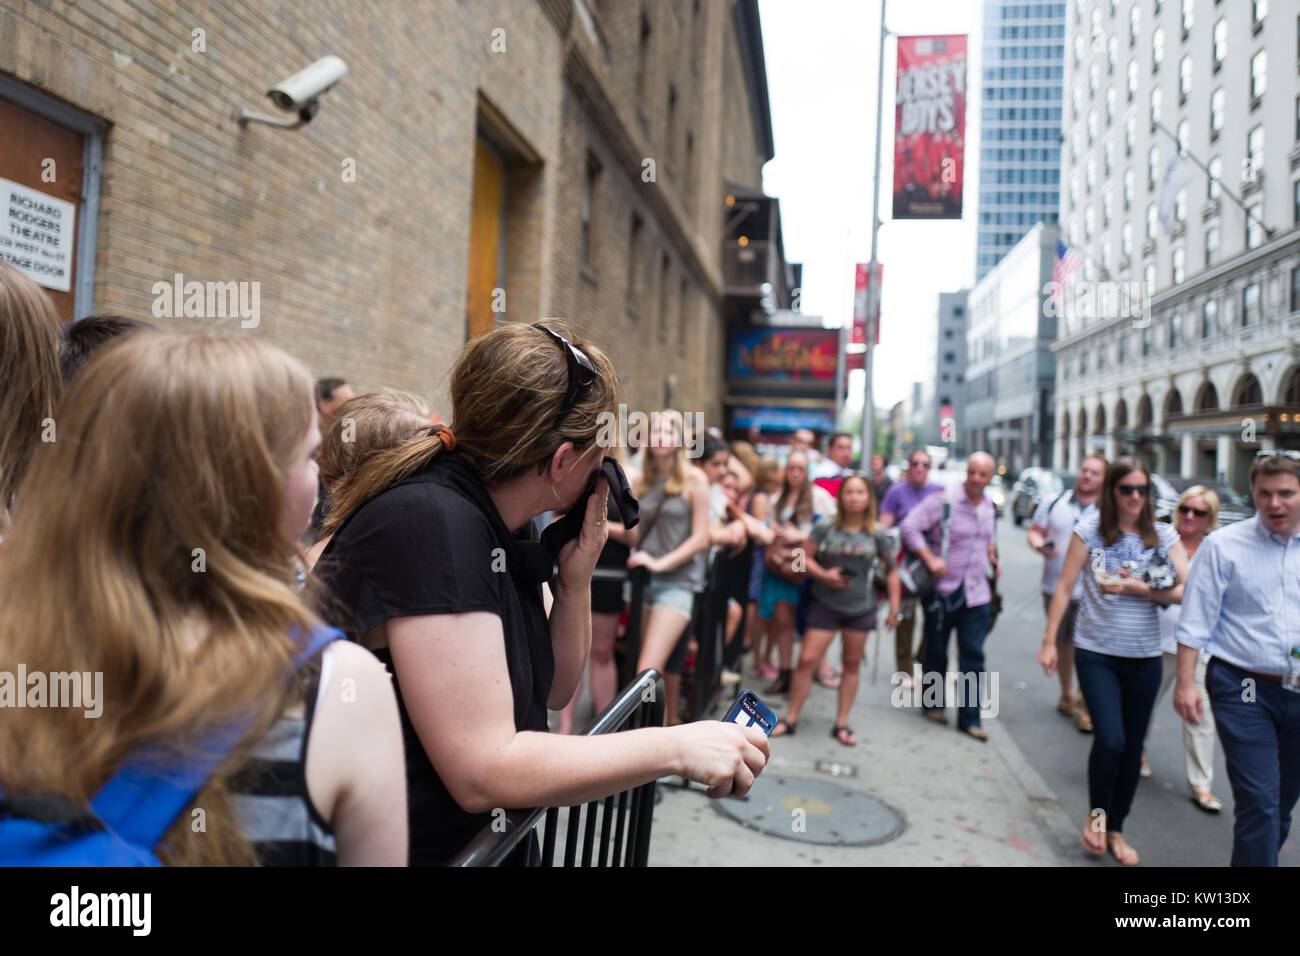 Before a performance of the Broadway musical Hamilton two days prior to creator Lin Manuel Miranda's departure from the show, fans relax while waiting at the stage door, New York City, New York, July 7, 2016. Stock Photo